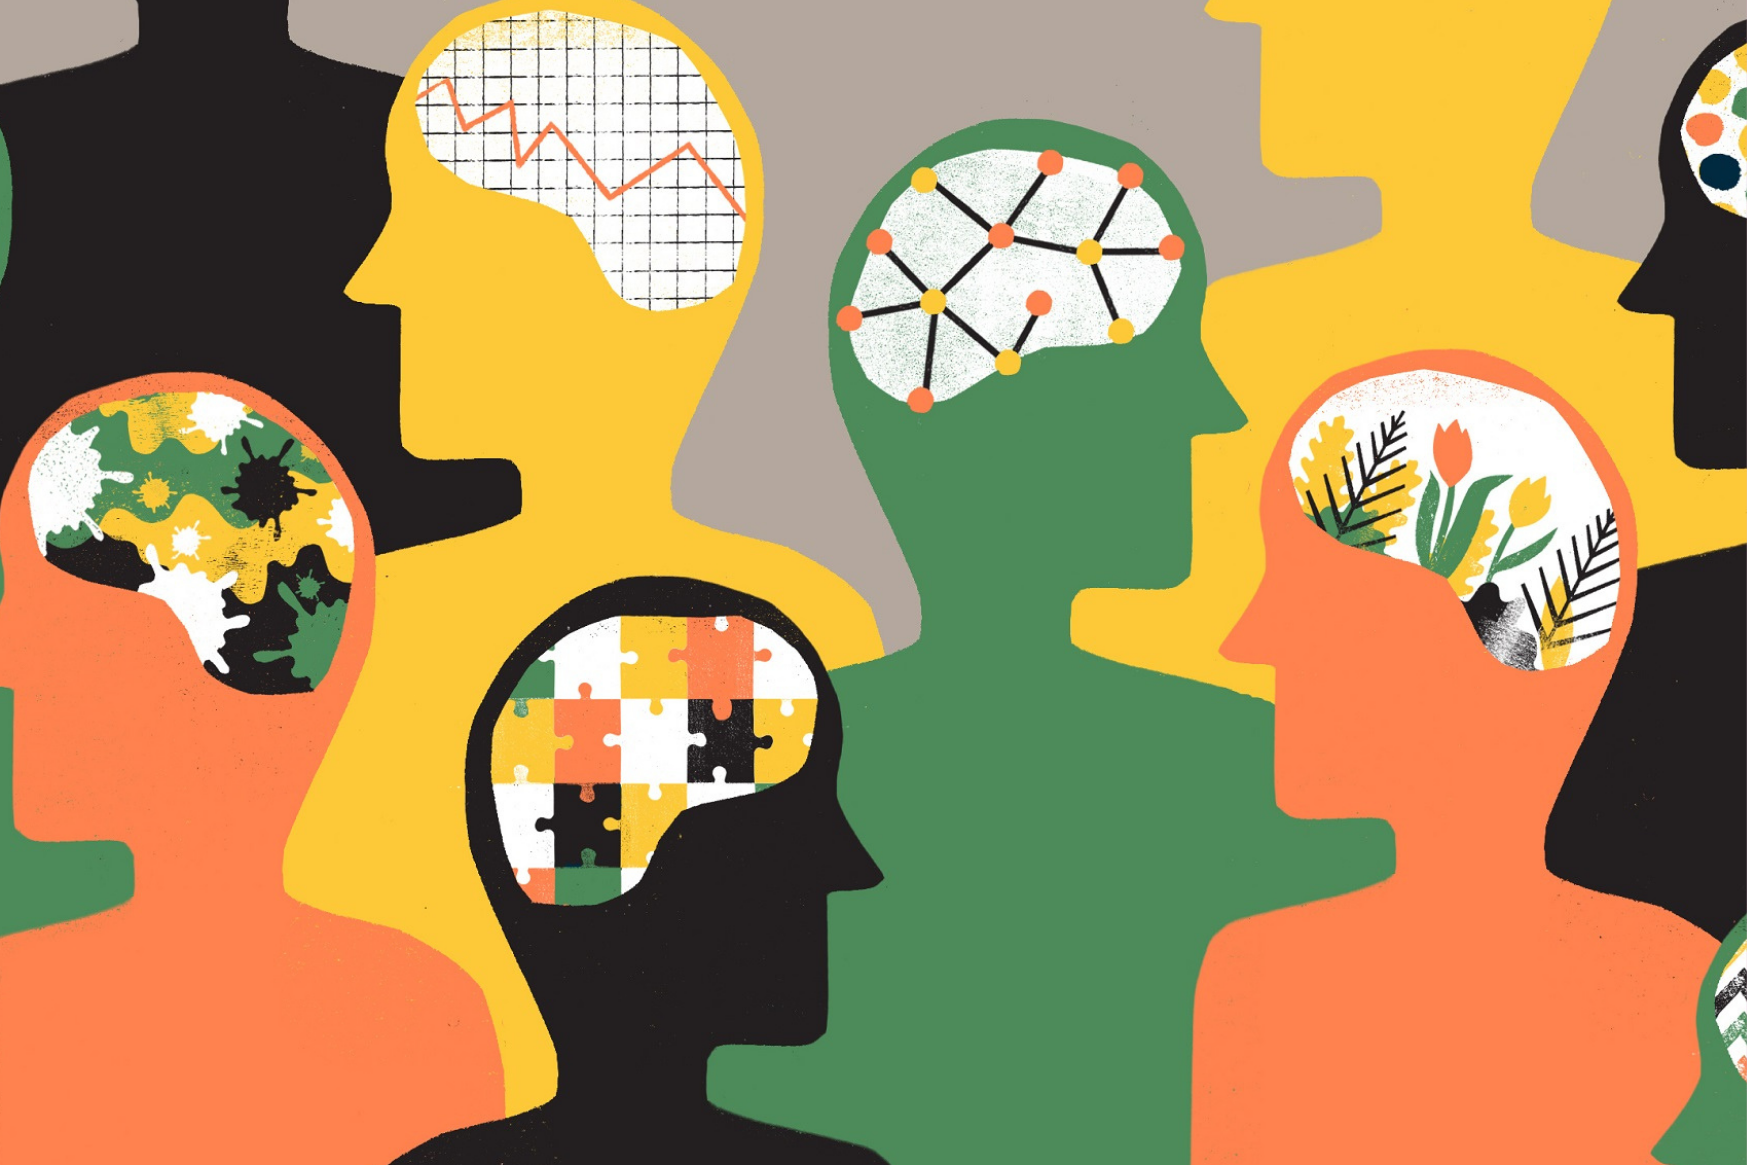 Illustration of an outline of people's heads in green, orange, and yellow with different illustrations (puzzles, charts, diagrams) where the brain should be